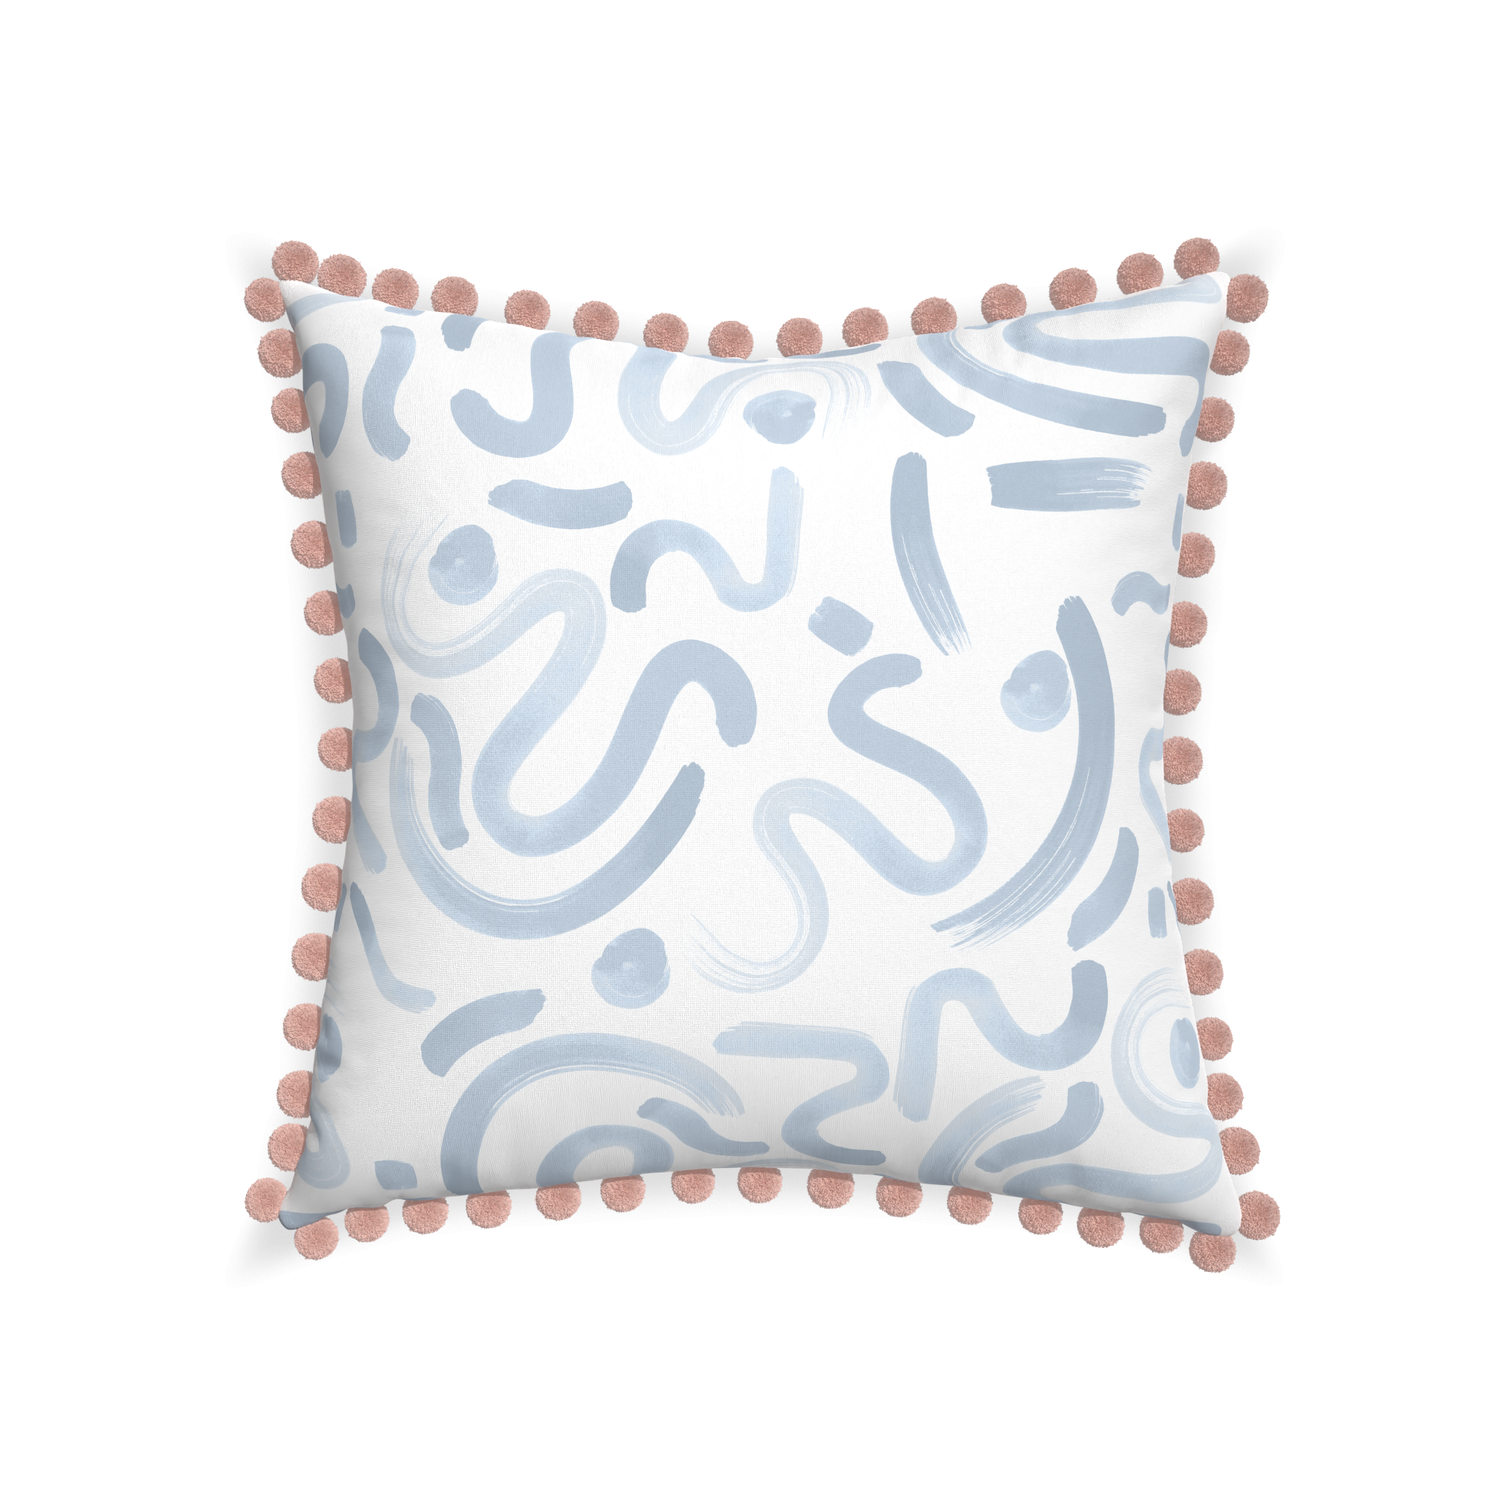 22-square hockney sky custom abstract sky bluepillow with rose pom pom on white background